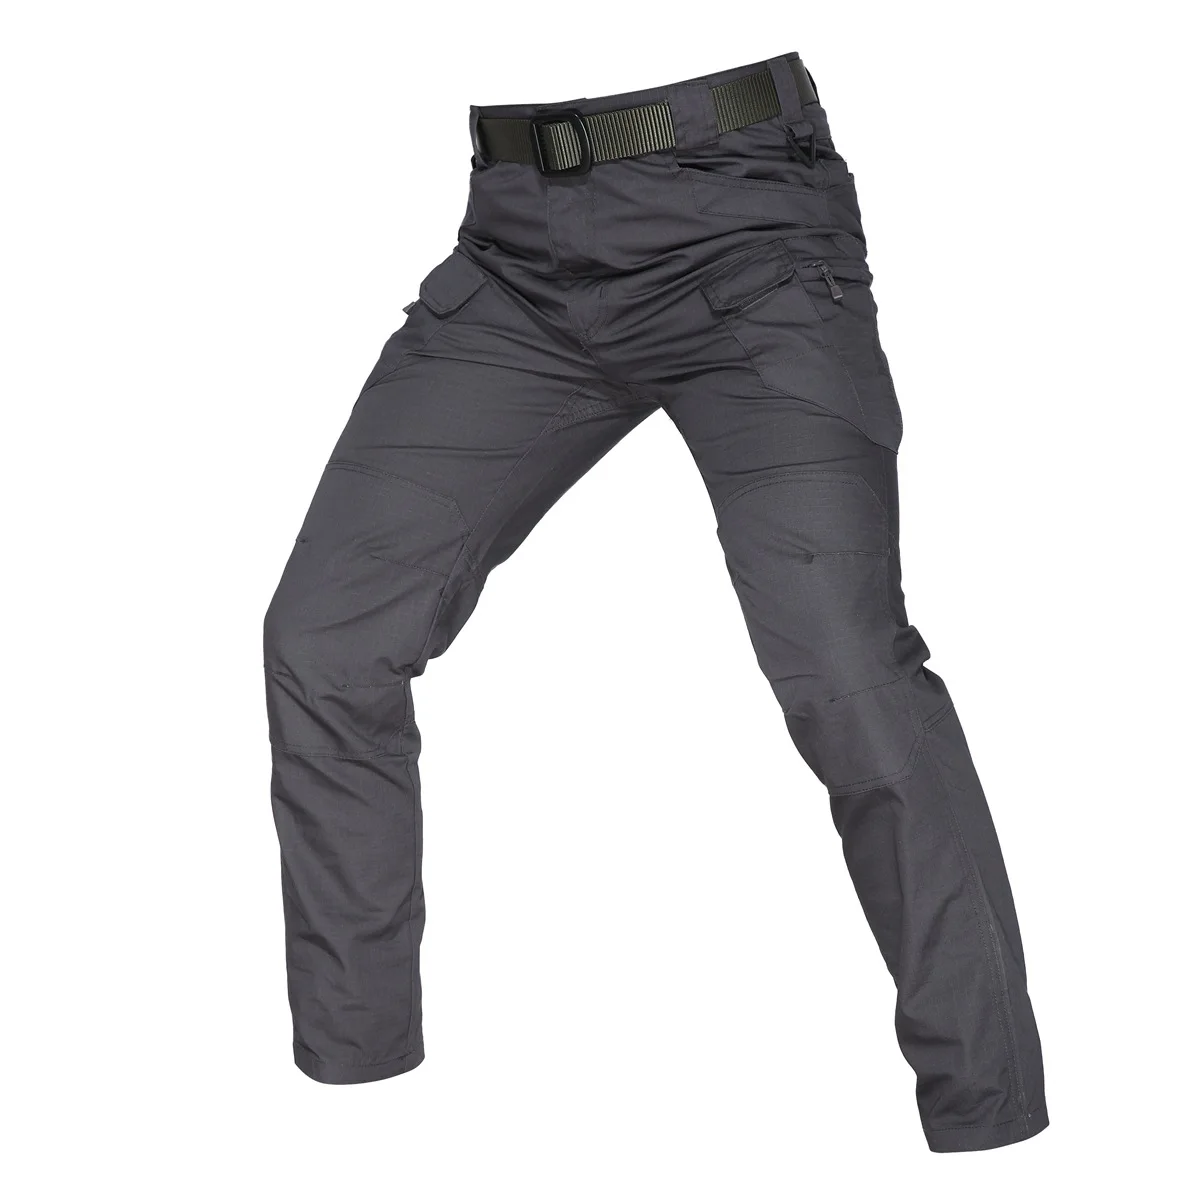 Men's Security Guard Uniform Pants Tactical Ripstop Multi Pocket Cargo Training Work Trousers Outdoor Hunting Hiking Wear